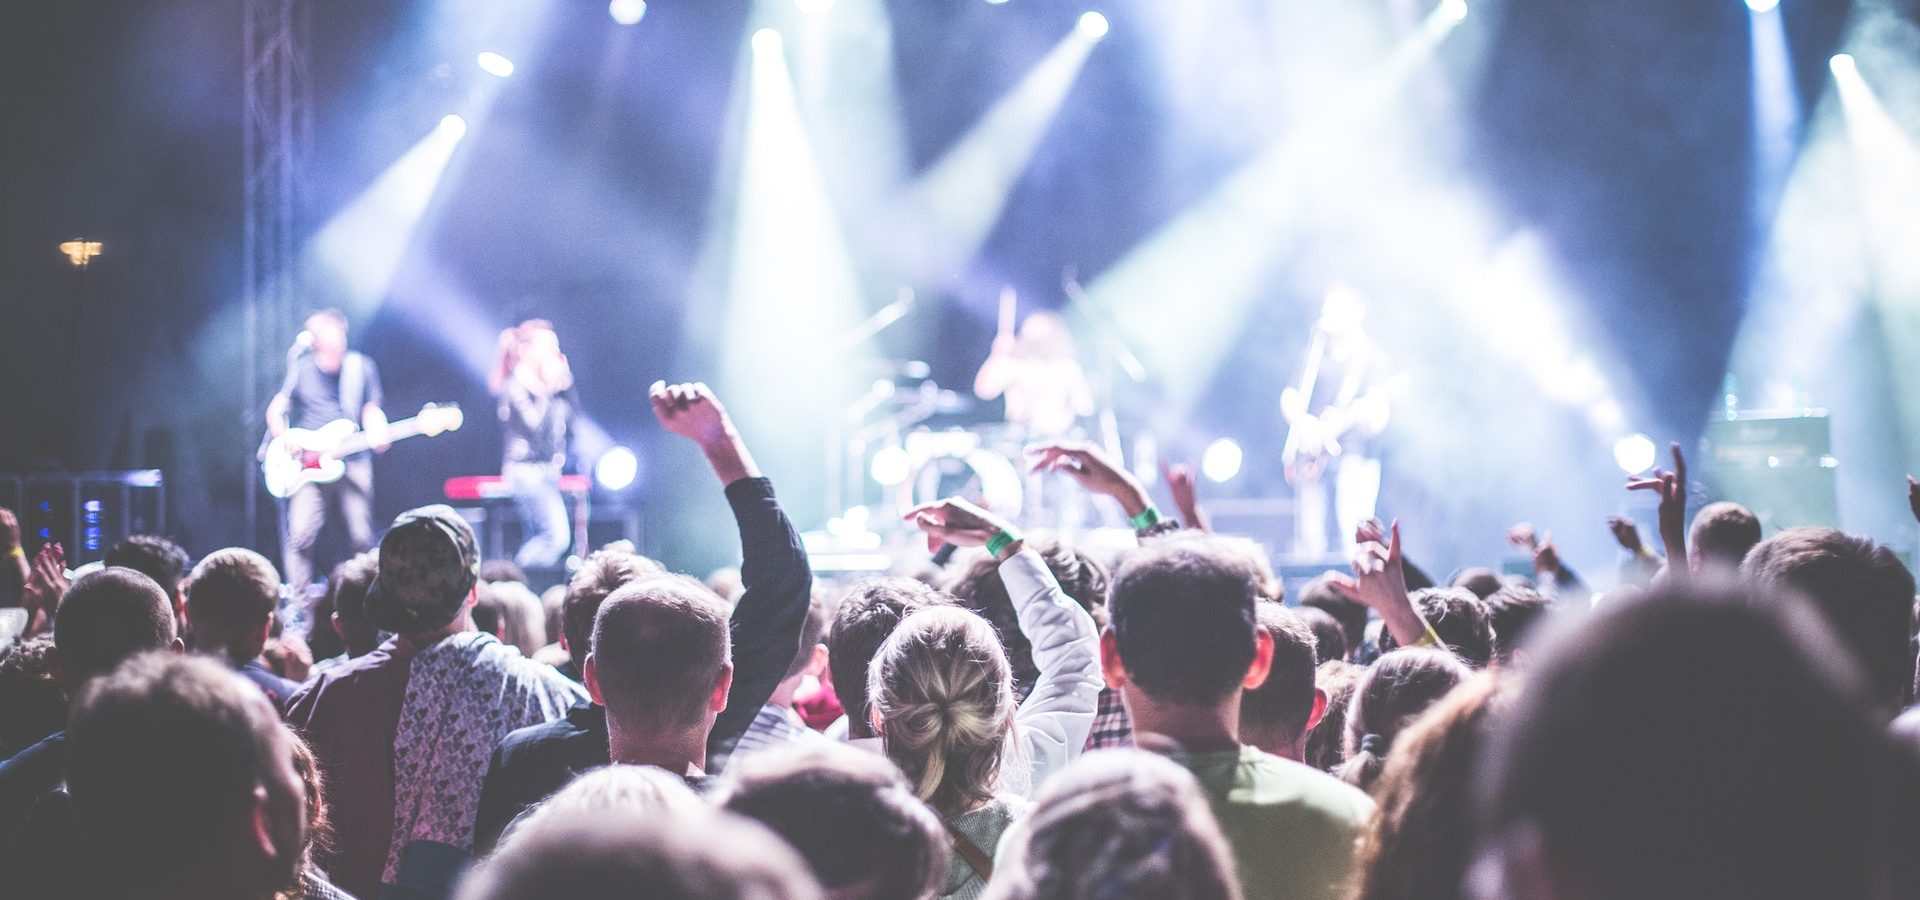 Audience watching a loud concert, at risk of noise induced hearing loss